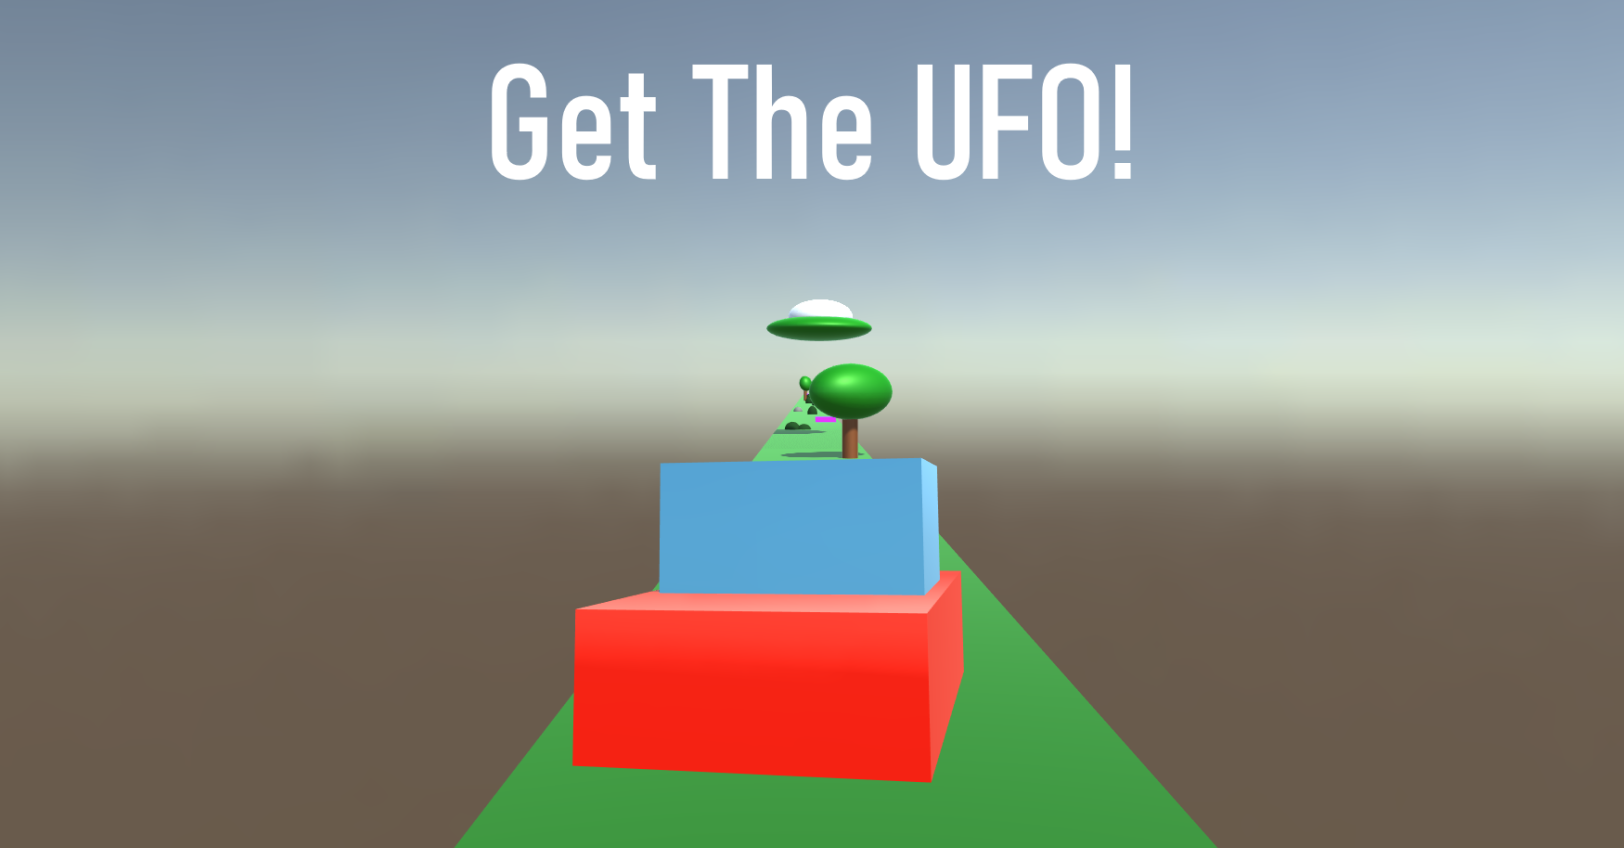 Get The UFO!